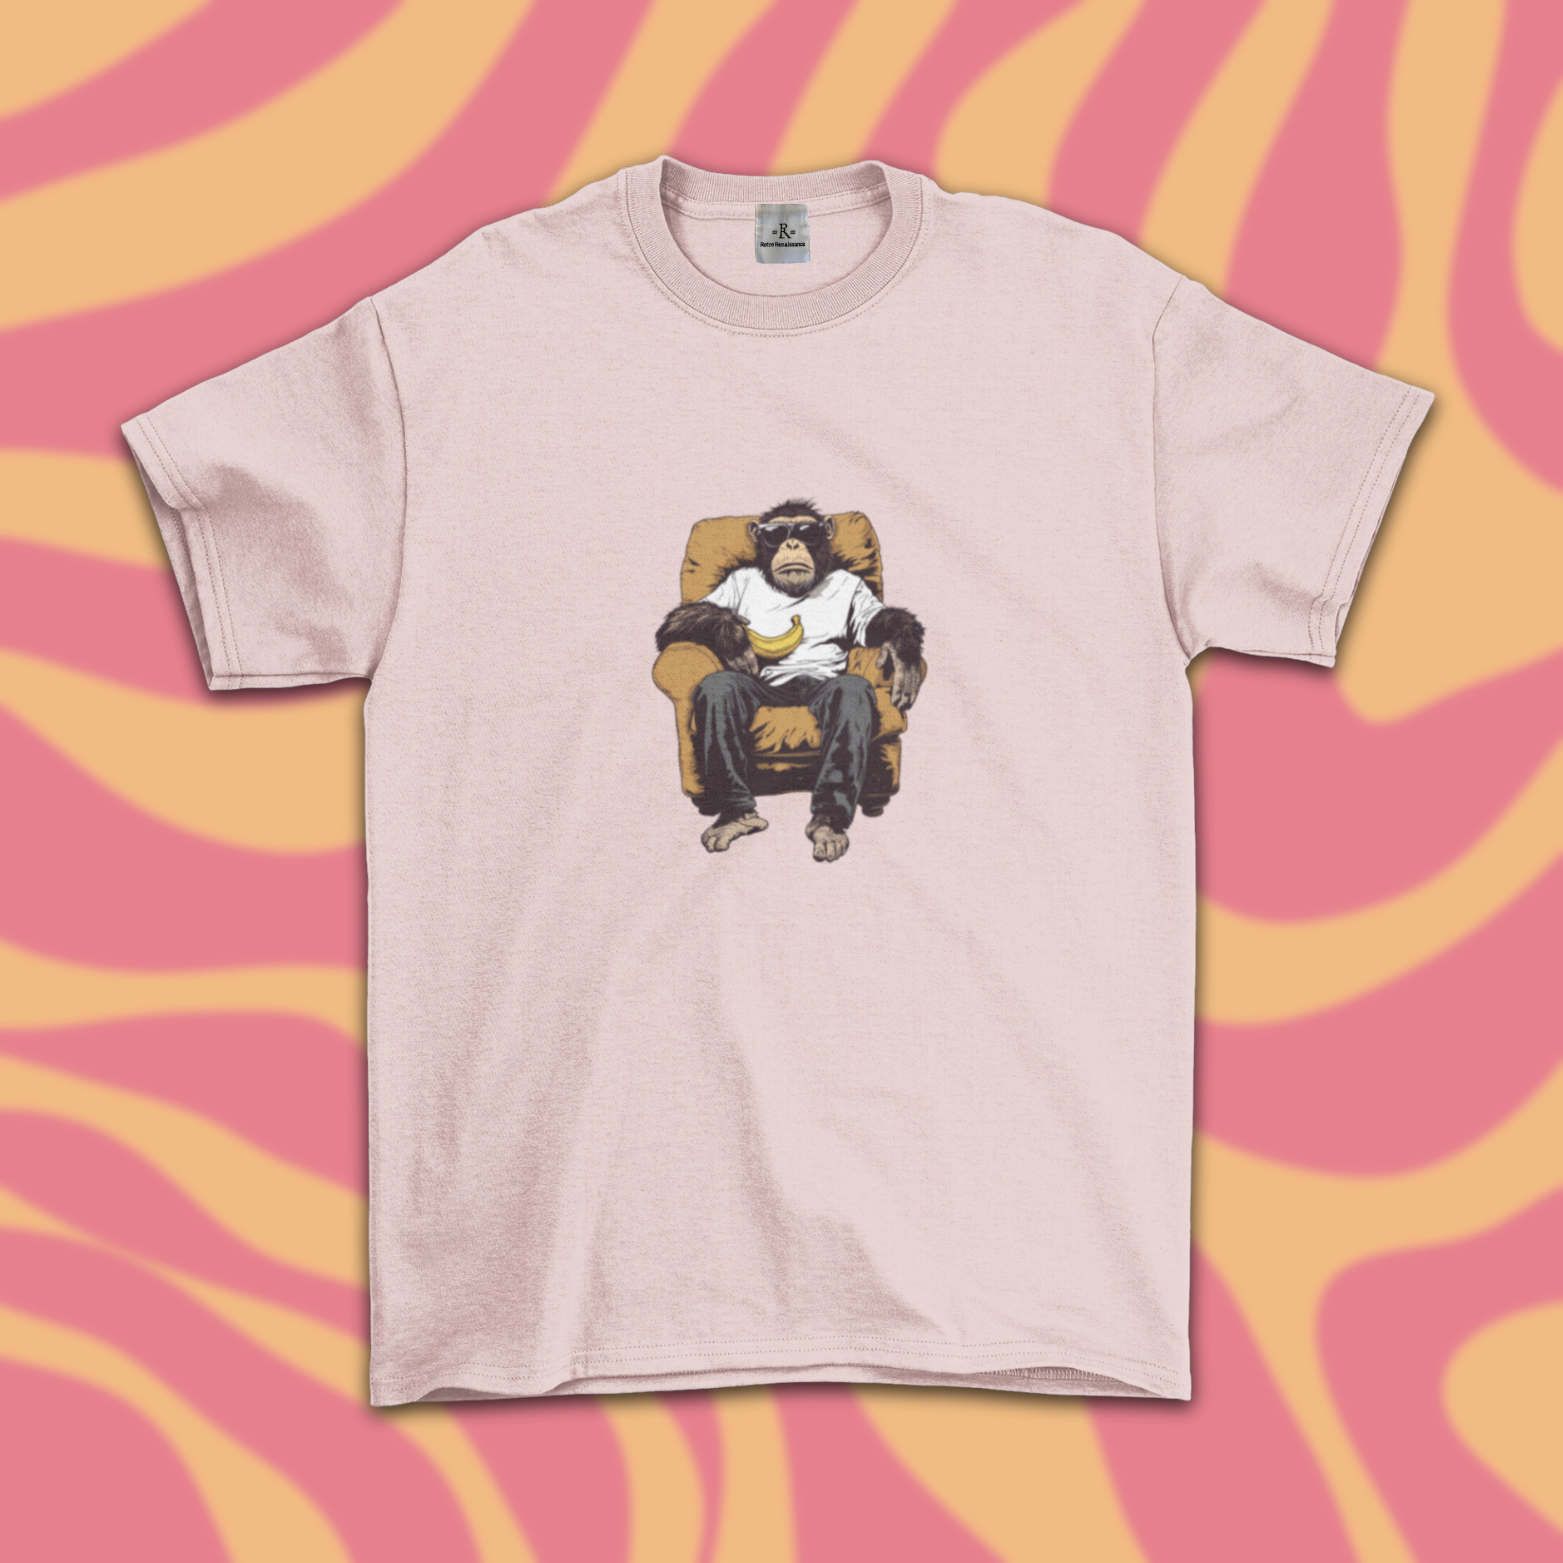 Retro Style Graphic Tee, Chilled-Out Chimp